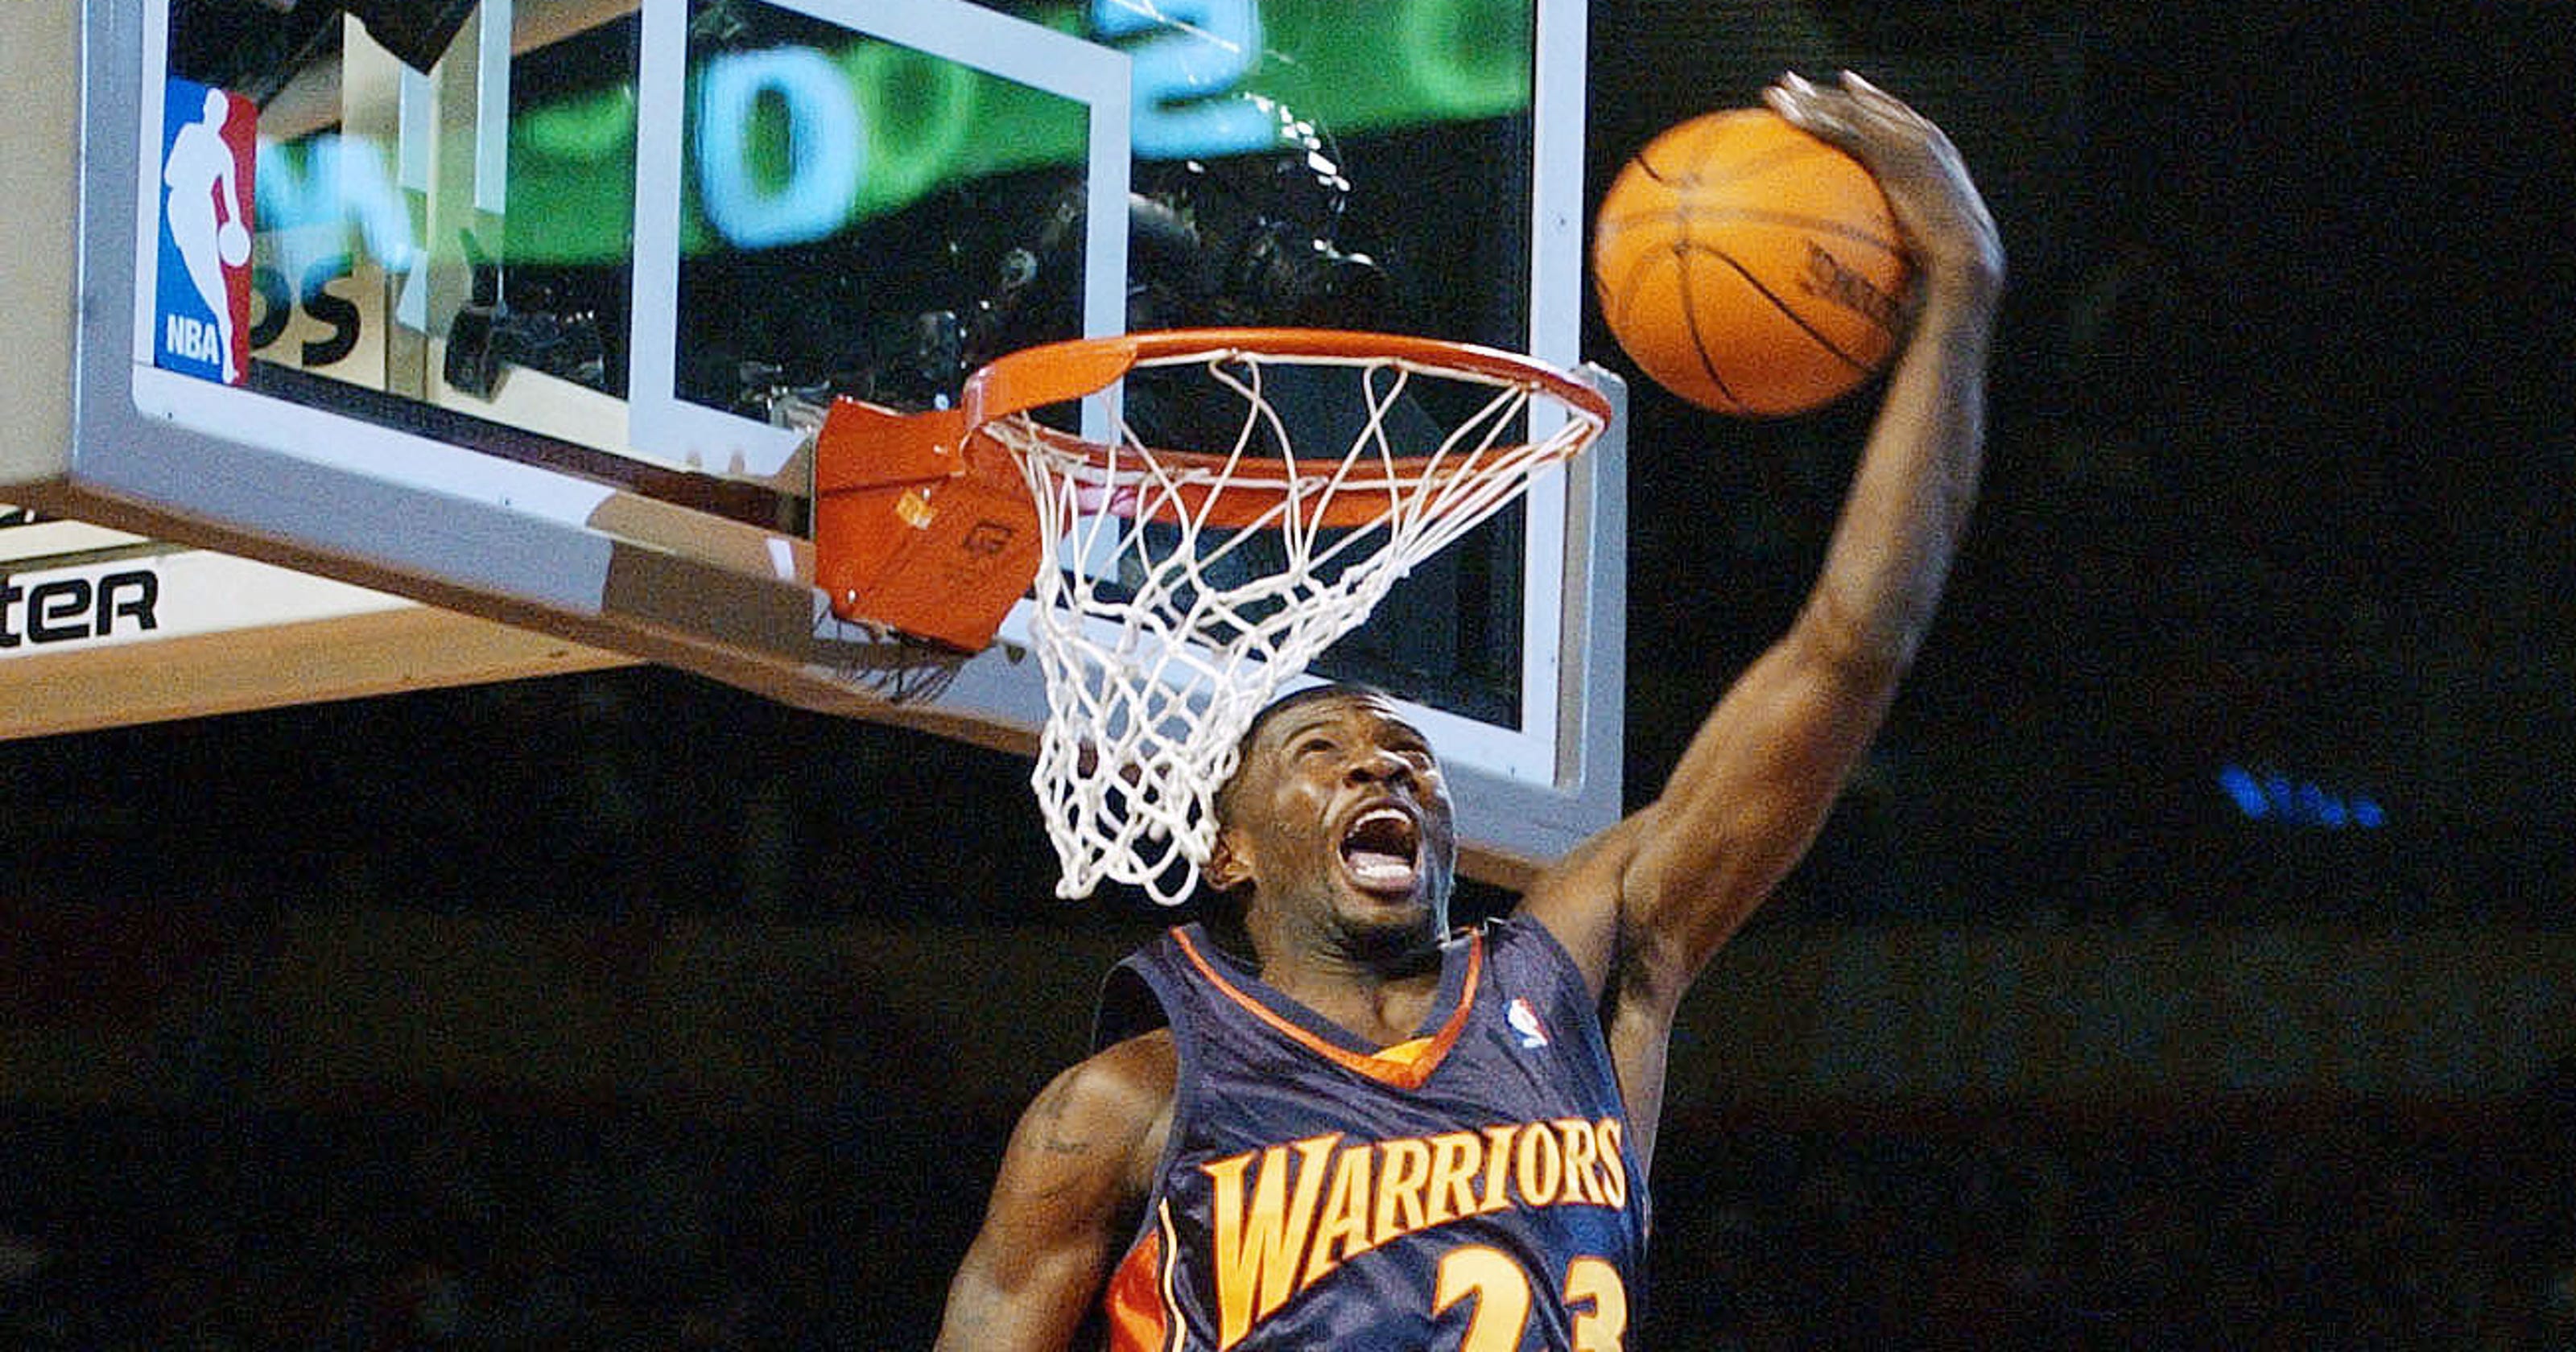 Ranking The 10 Best Jams Of The Nba Slam Dunk Contest Since 2000